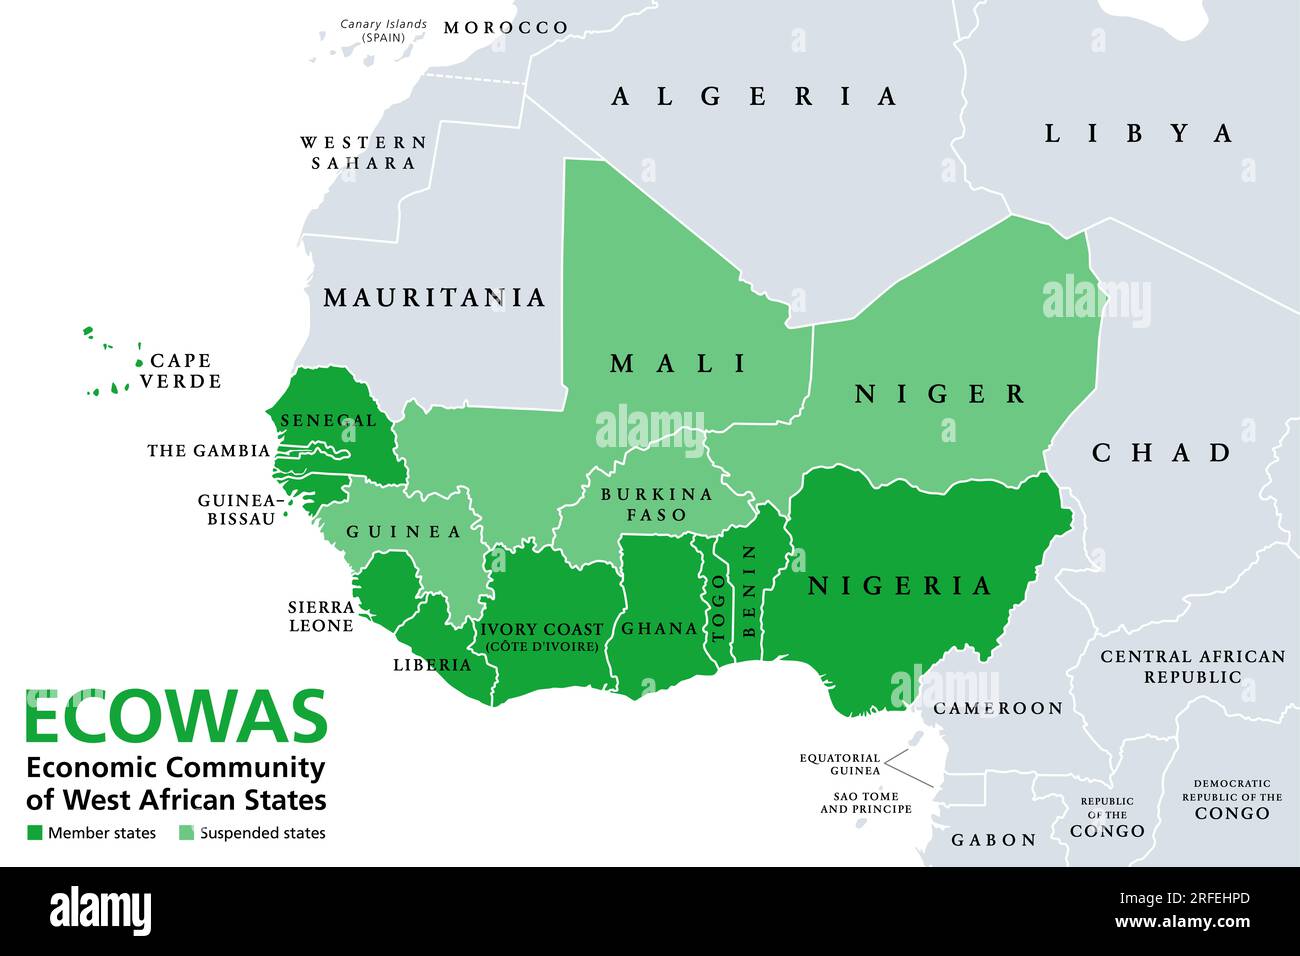 ECOWAS, Economic Community of West African States, member states, political map. Also known as CEDEAO, is a regional political and economic union. Stock Photo